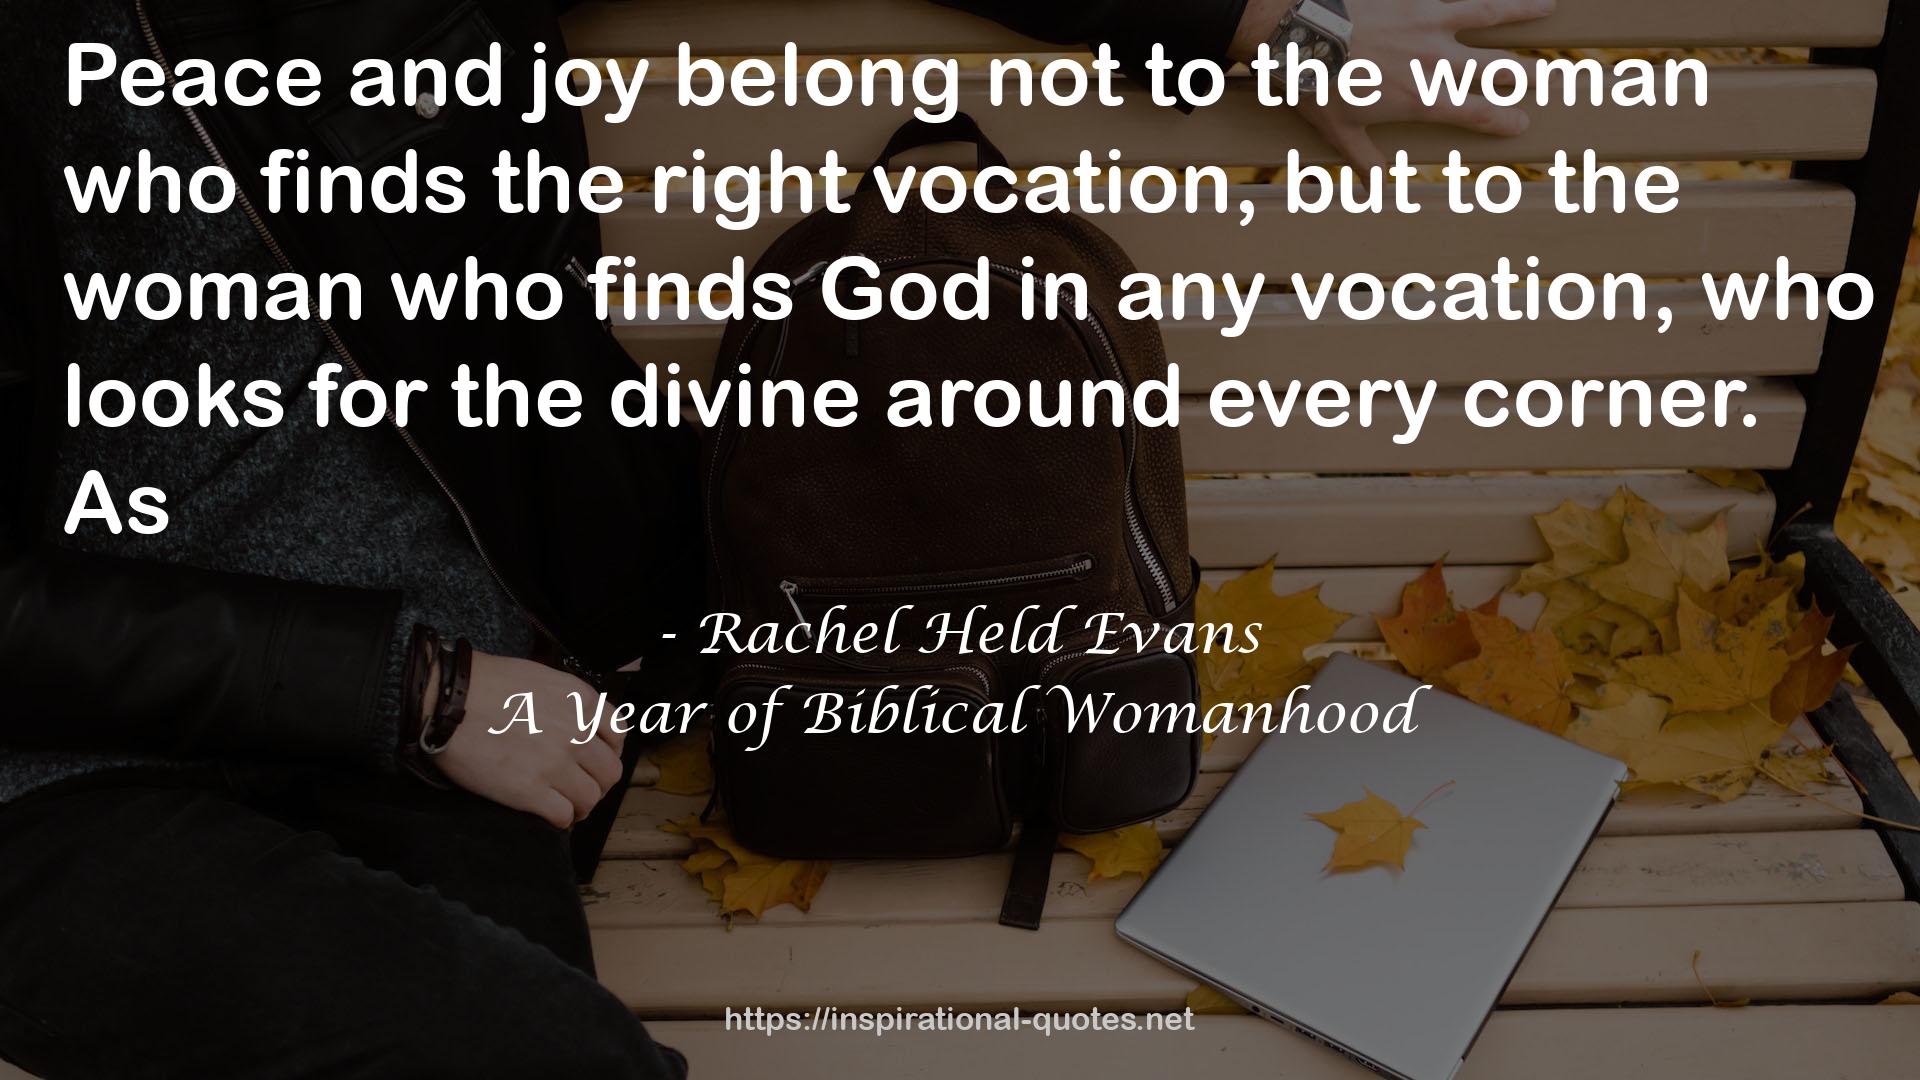 A Year of Biblical Womanhood QUOTES